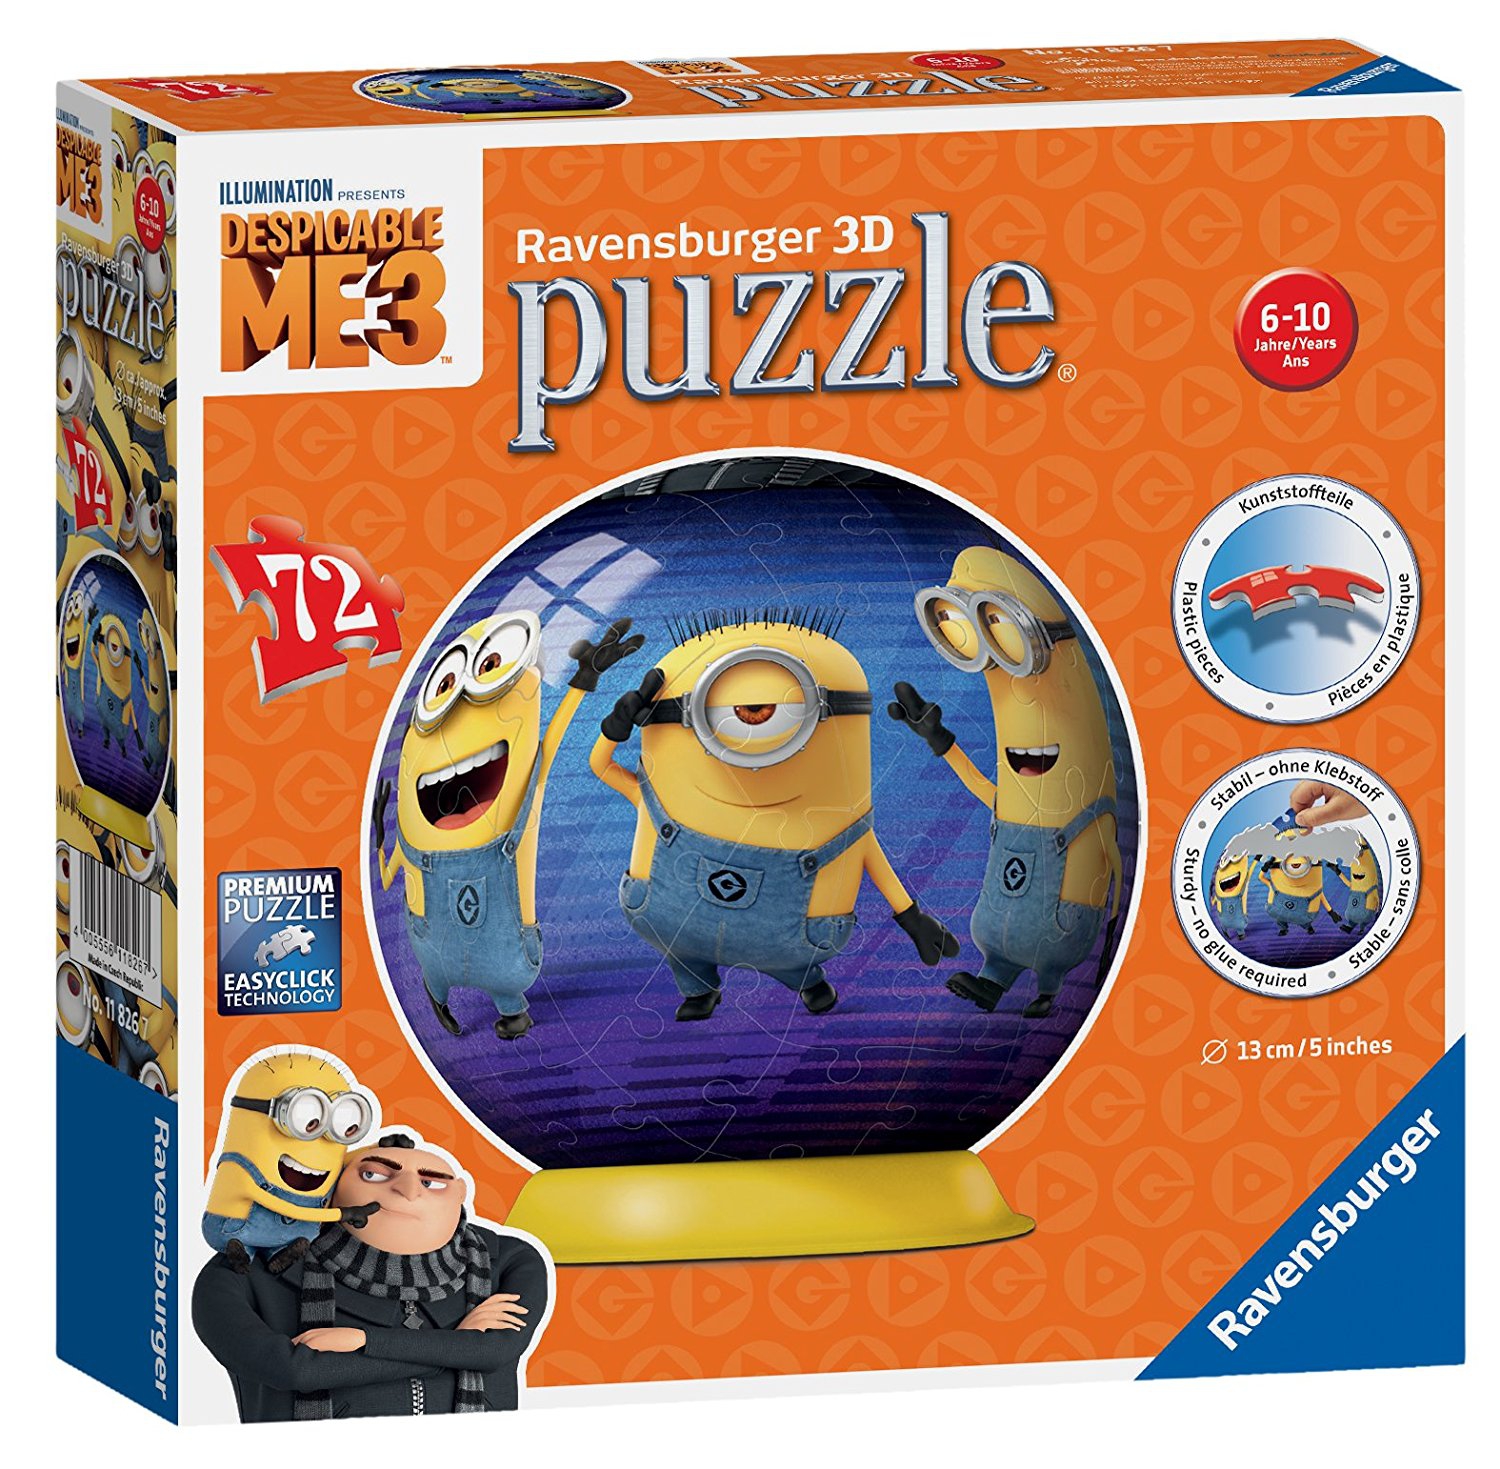 Despicable Me 3 'Minions' 3d 72 Piece Ball Jigsaw Puzzle Game